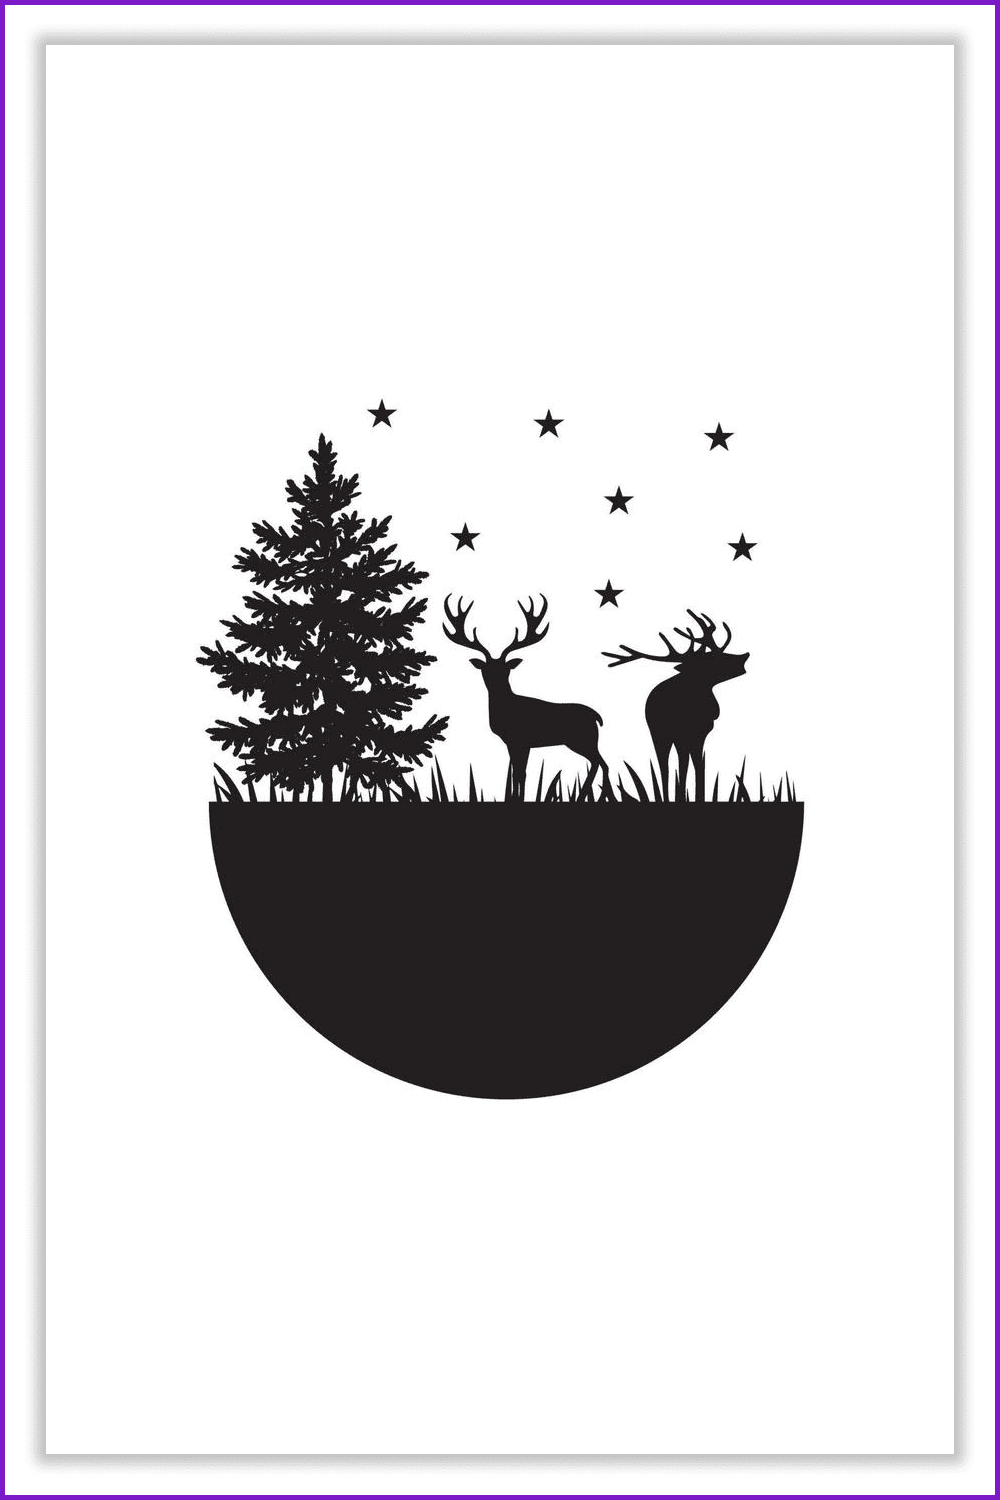 Black silhouettes of two deer and spruce on a white background.